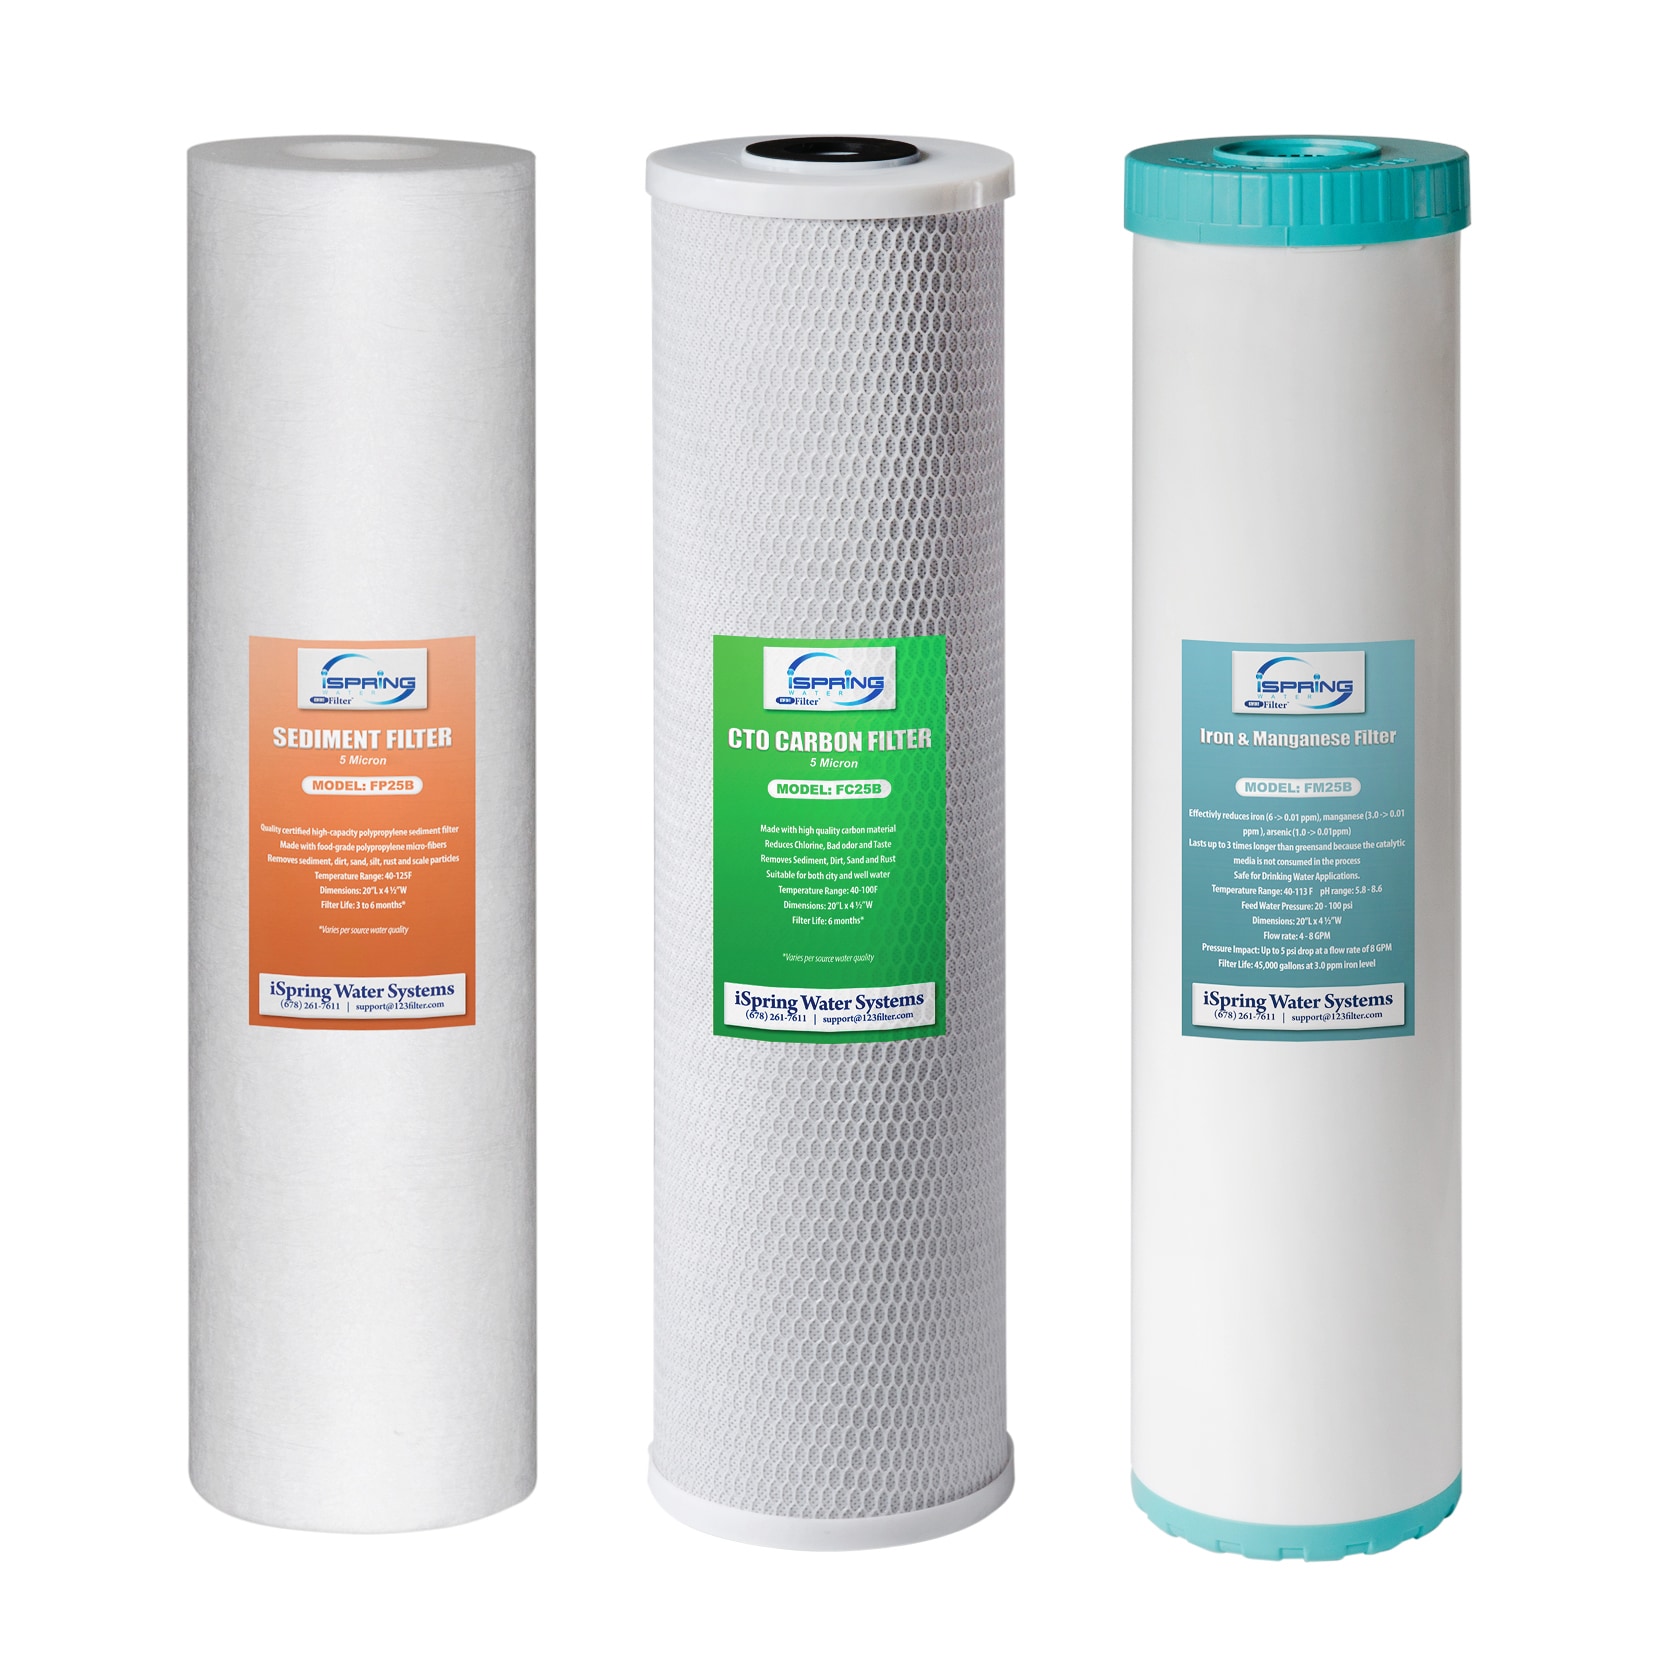 Replacement Filter Cartridge for HF99 Under Sink Filter